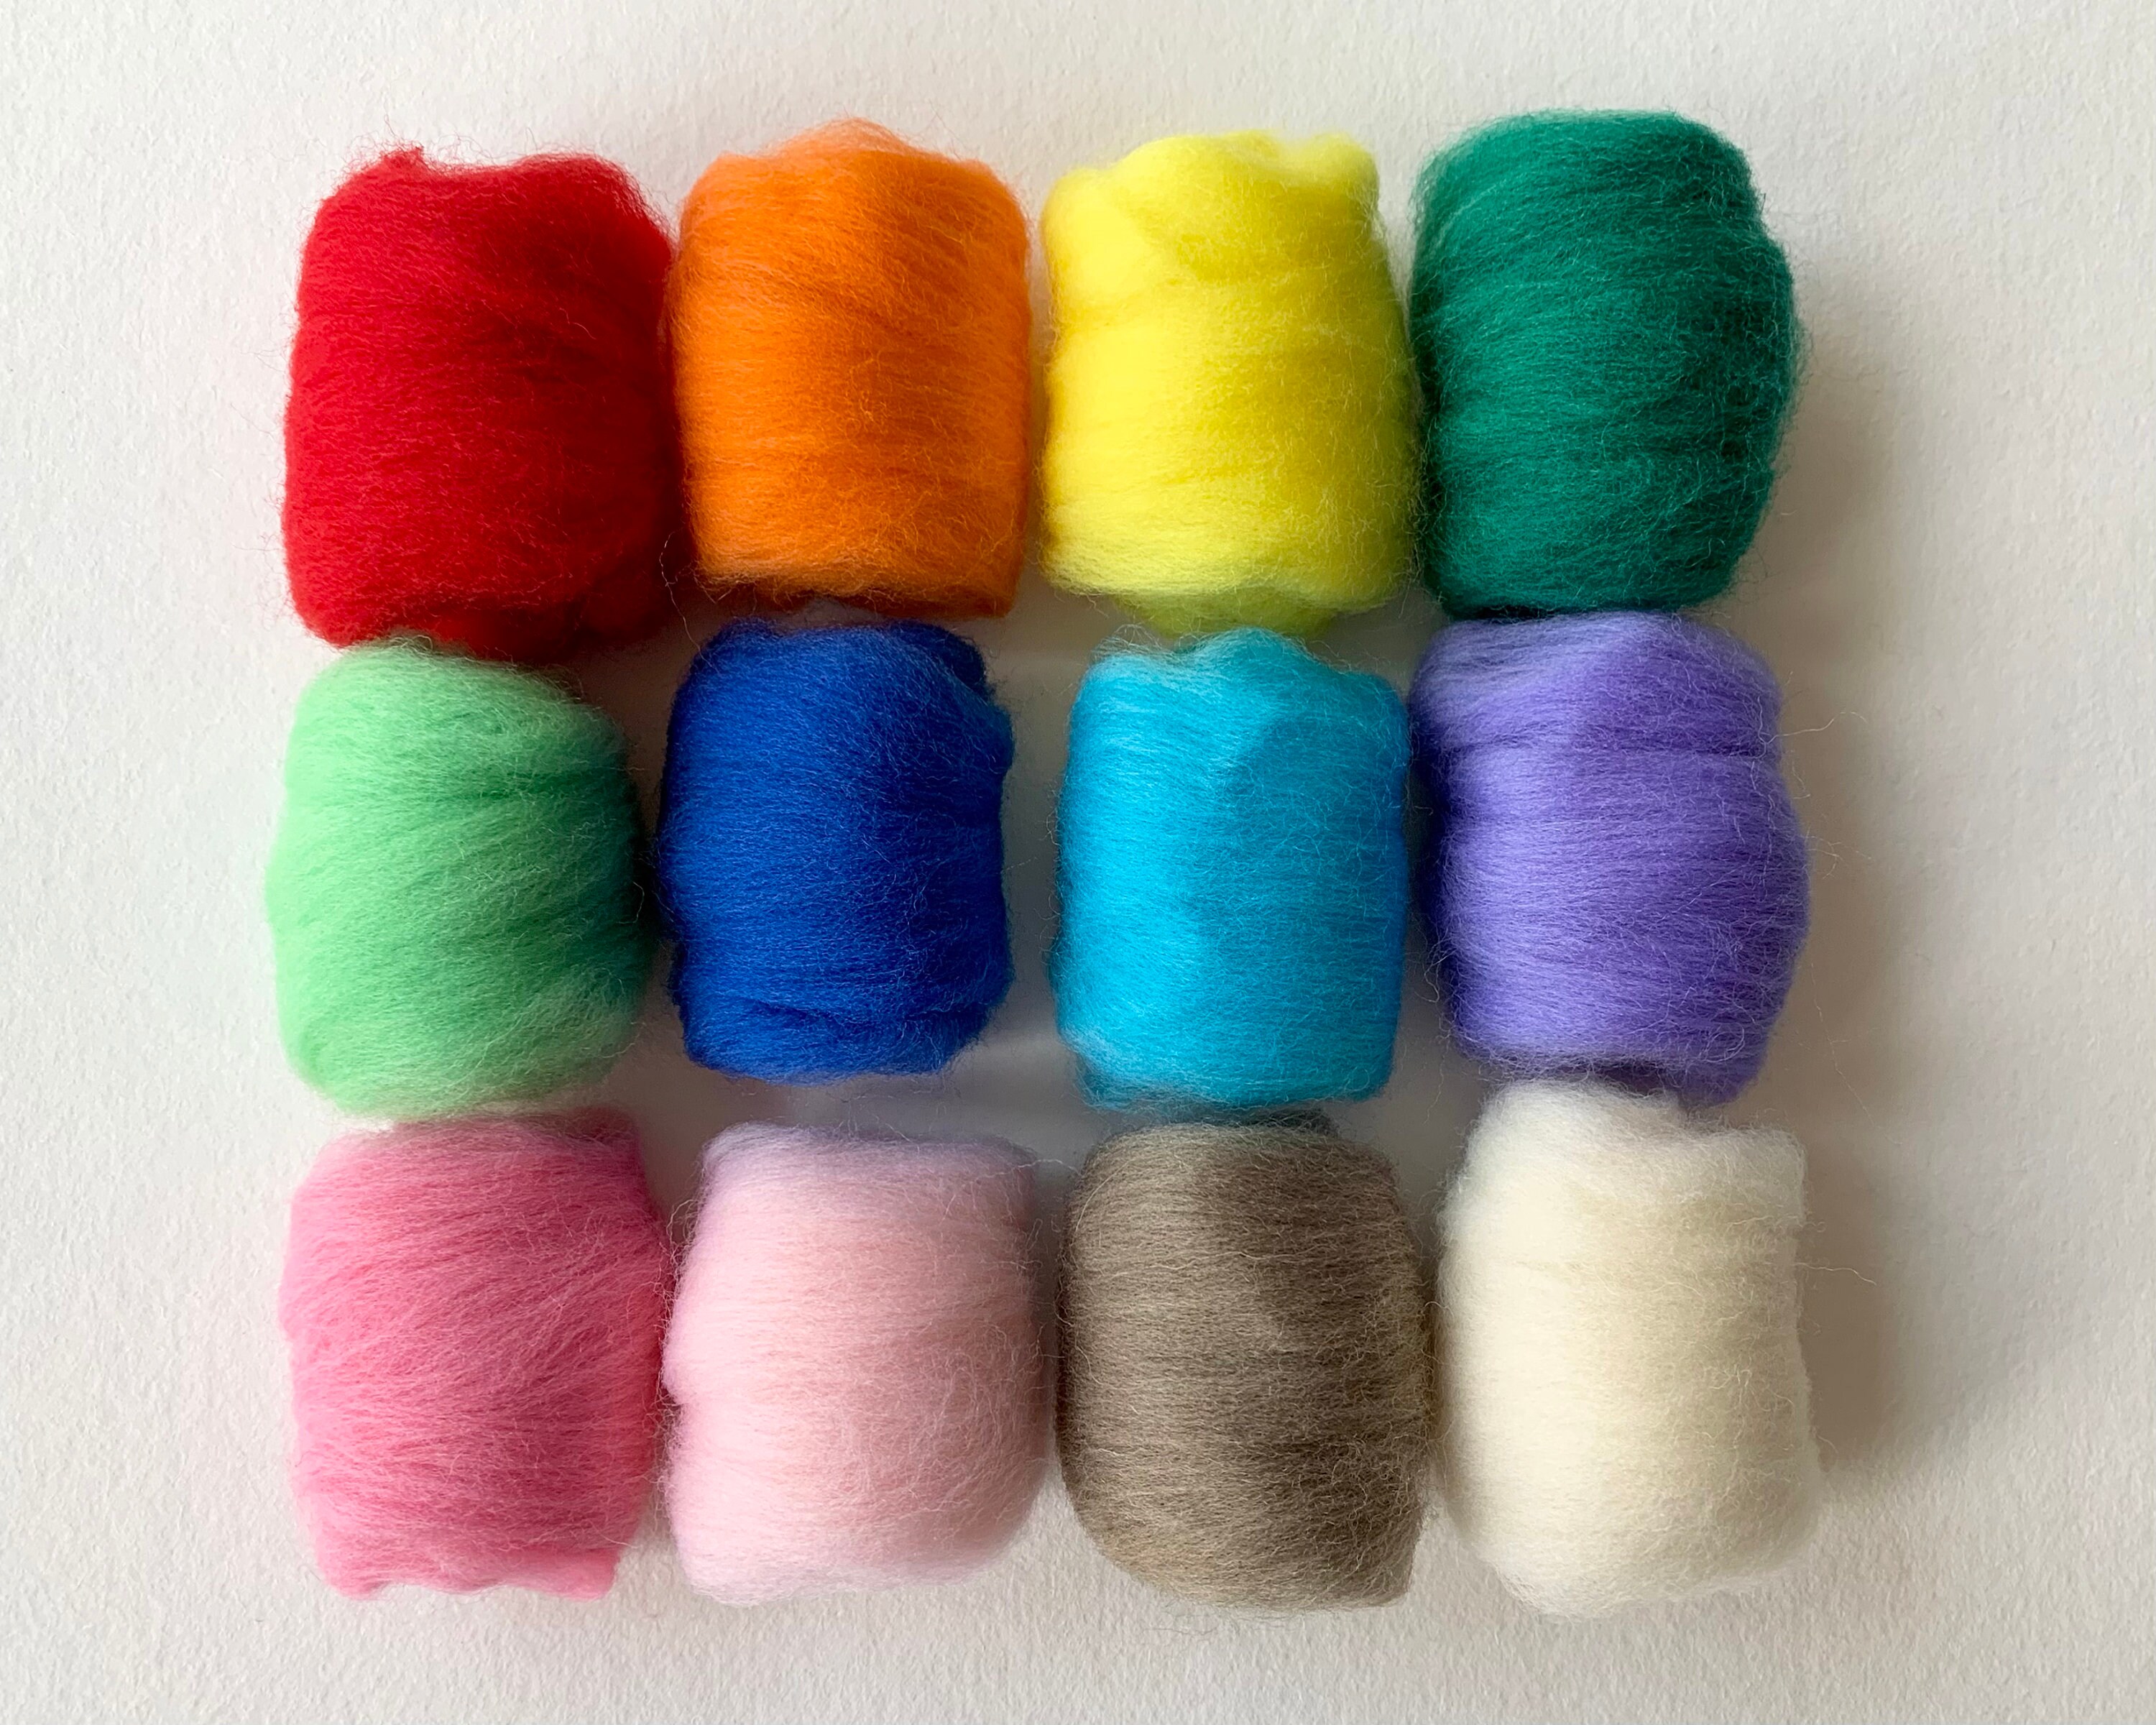 Neutral Palette Extra Fine Merino Wool Roving – 6 yds, 6 Pack with Storage  for Needle Felting, Spinning Yarn, Fiber Arts & Crafts